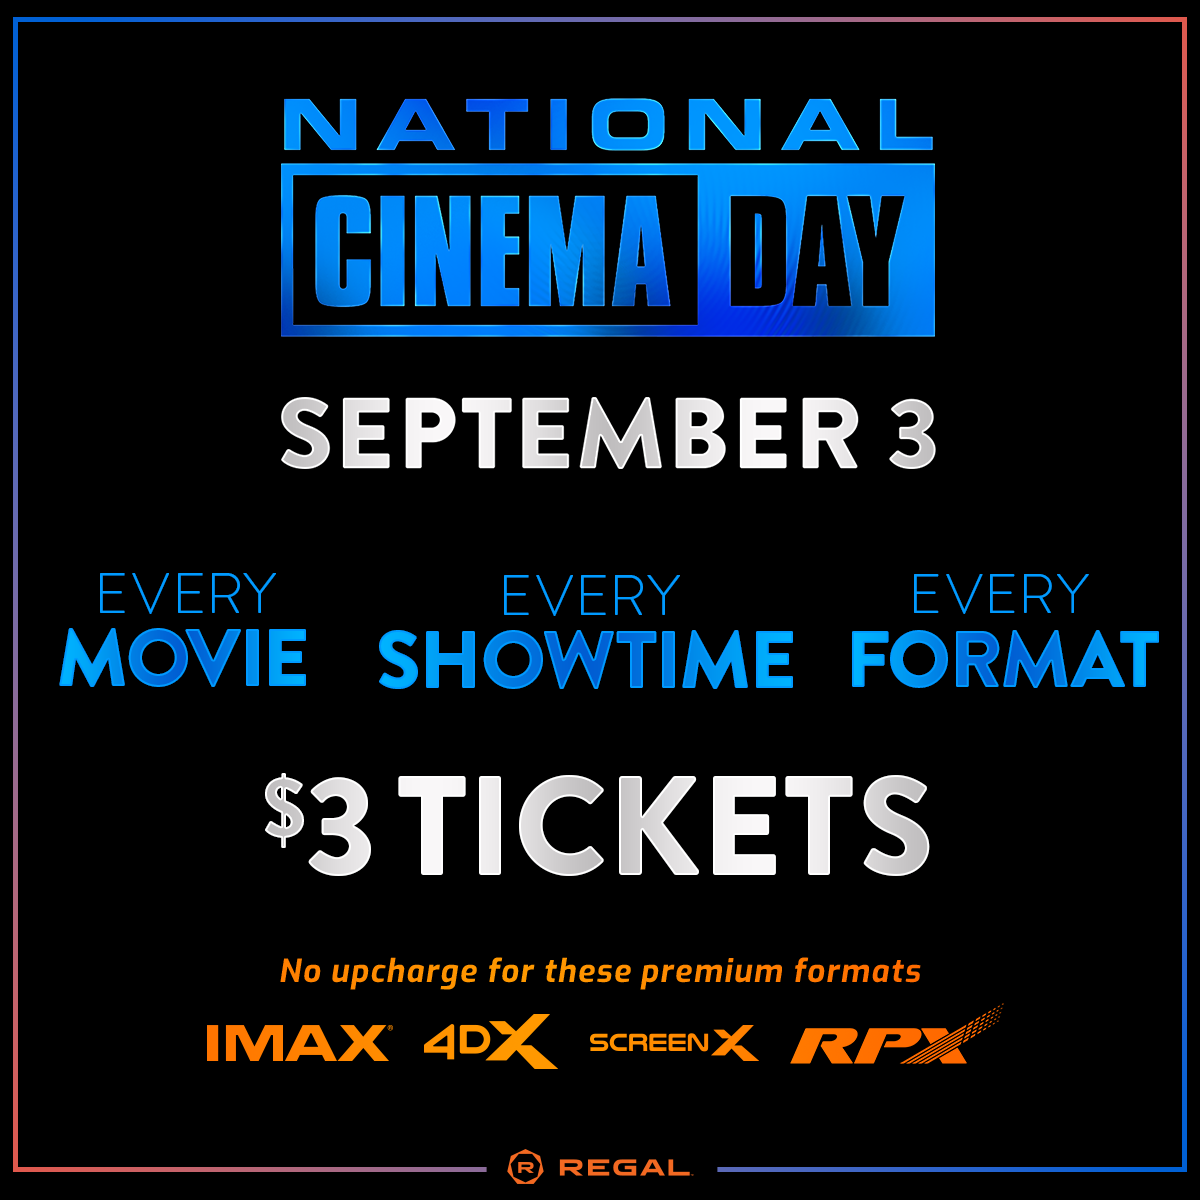 Celebrate National Cinema Day With 3 Movies at Regal! Aviation Mall